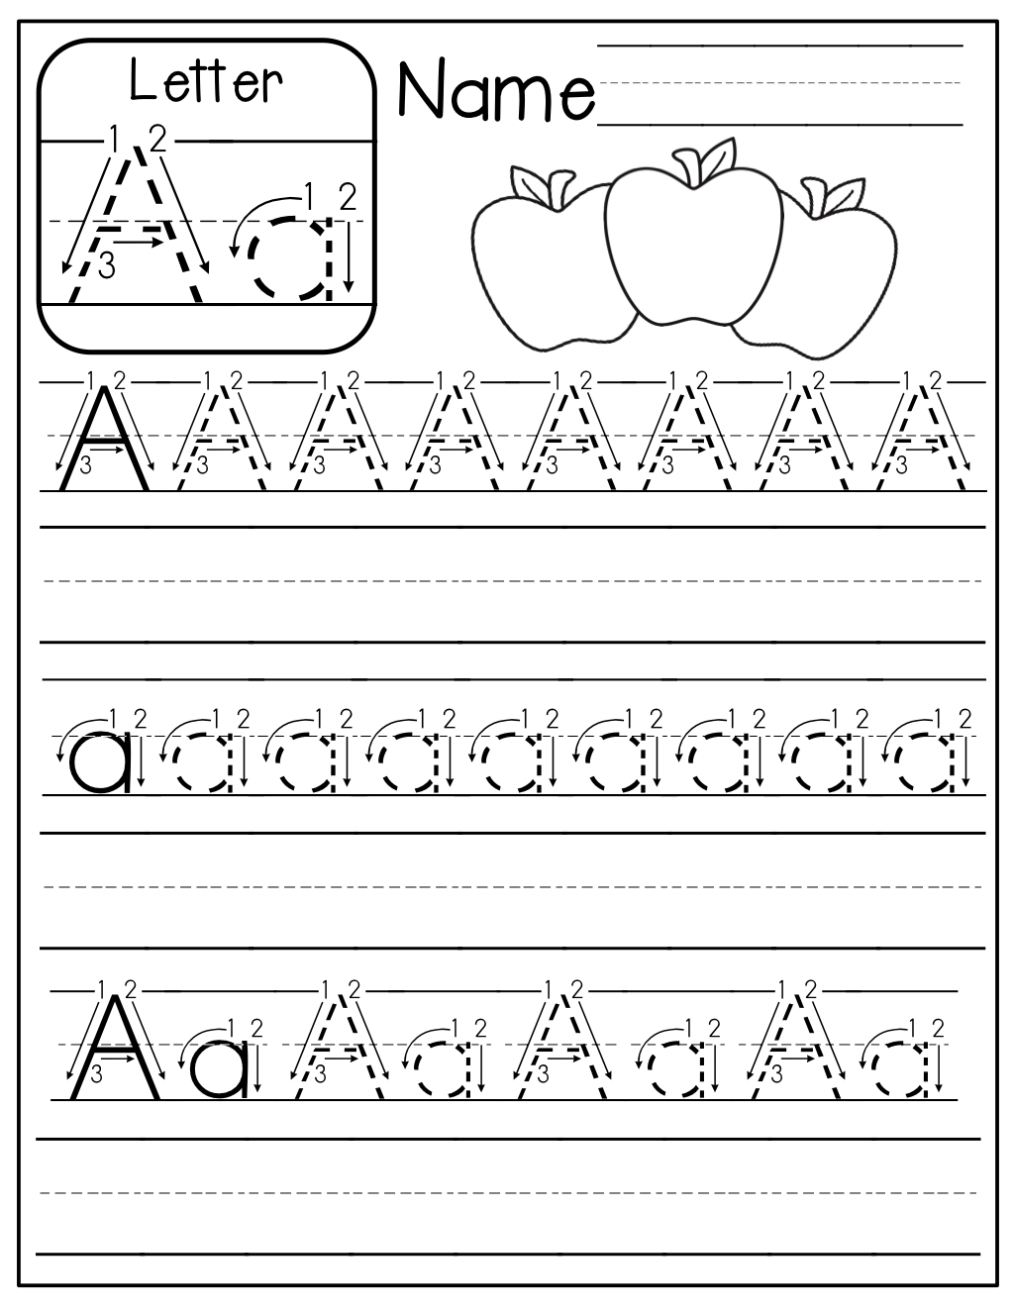 Tracing Letters Handwriting Worksheets | Tracinglettersworksheets Within Tracing Letters Template